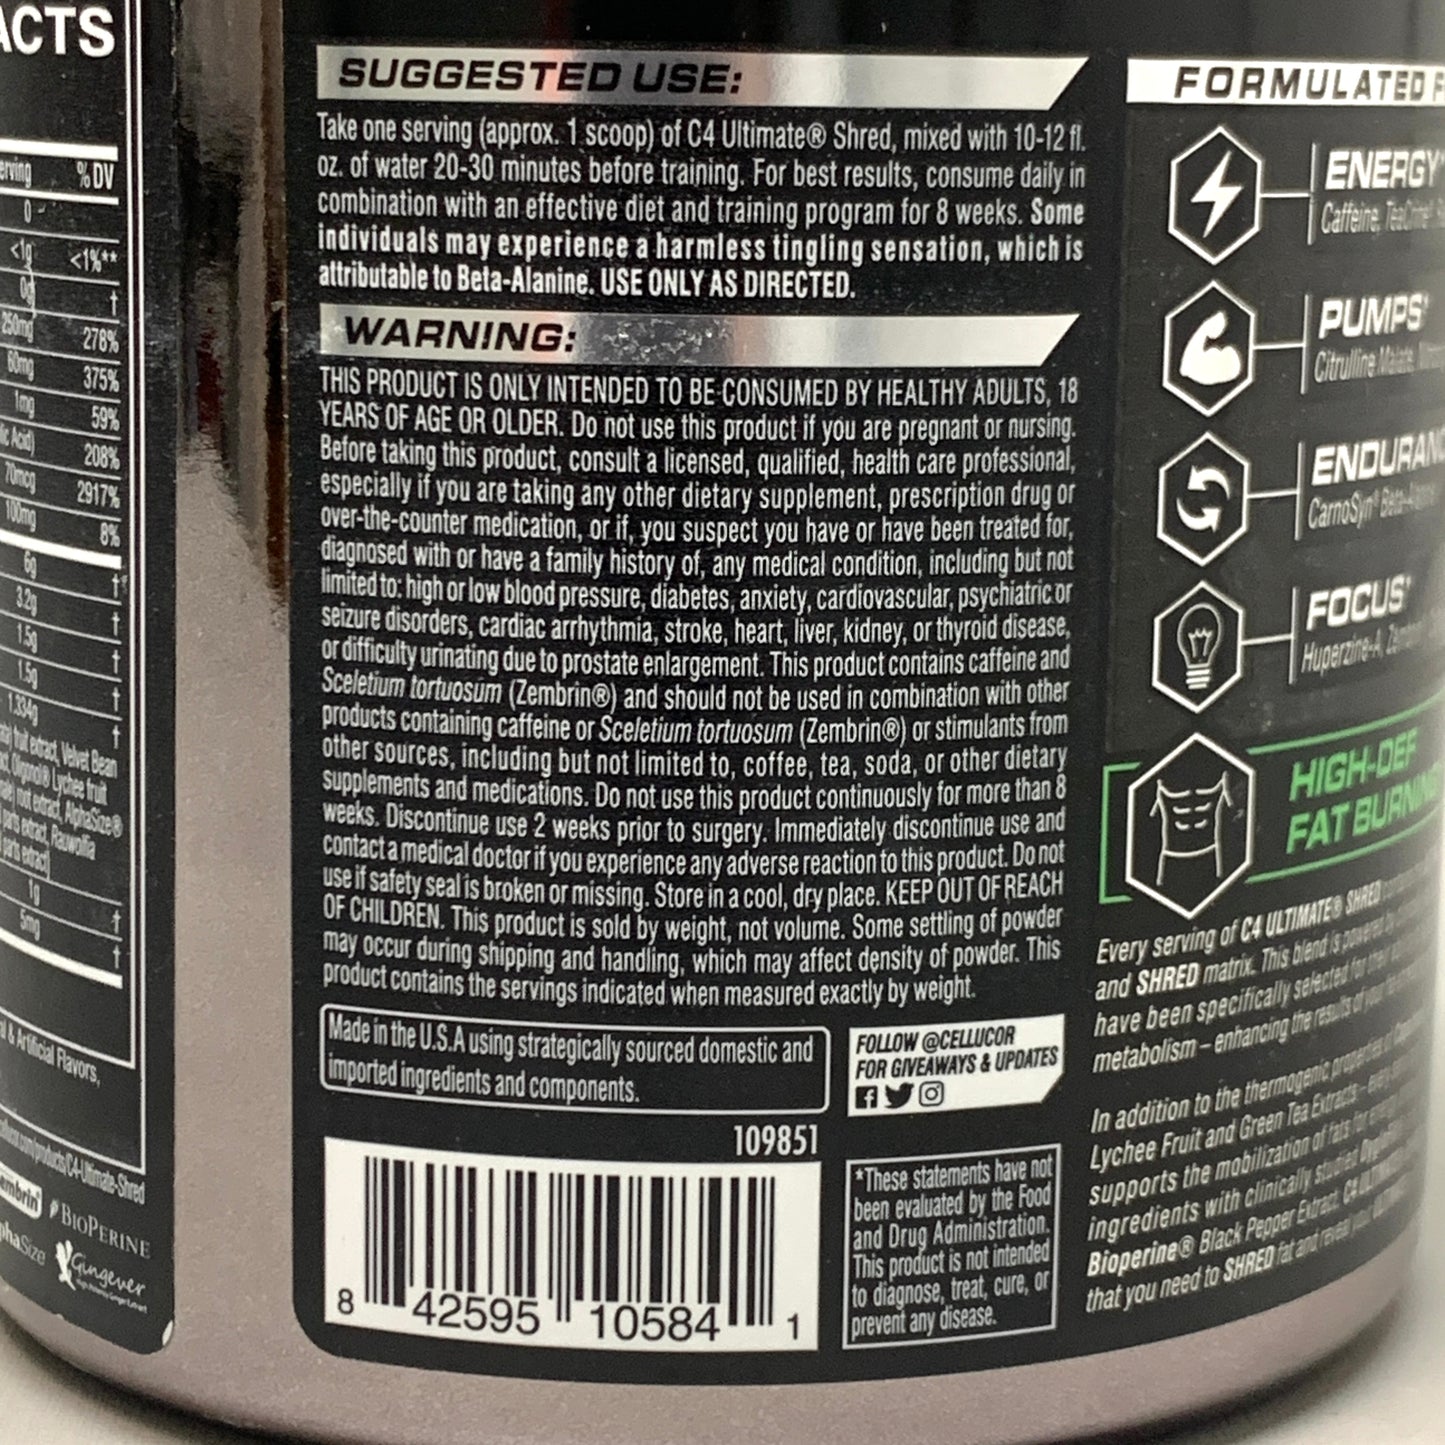 CELLUCOR C4 Ultimate Shred Strawberry Watermelon Dietary Supplement 12.3 oz. 350g (New)